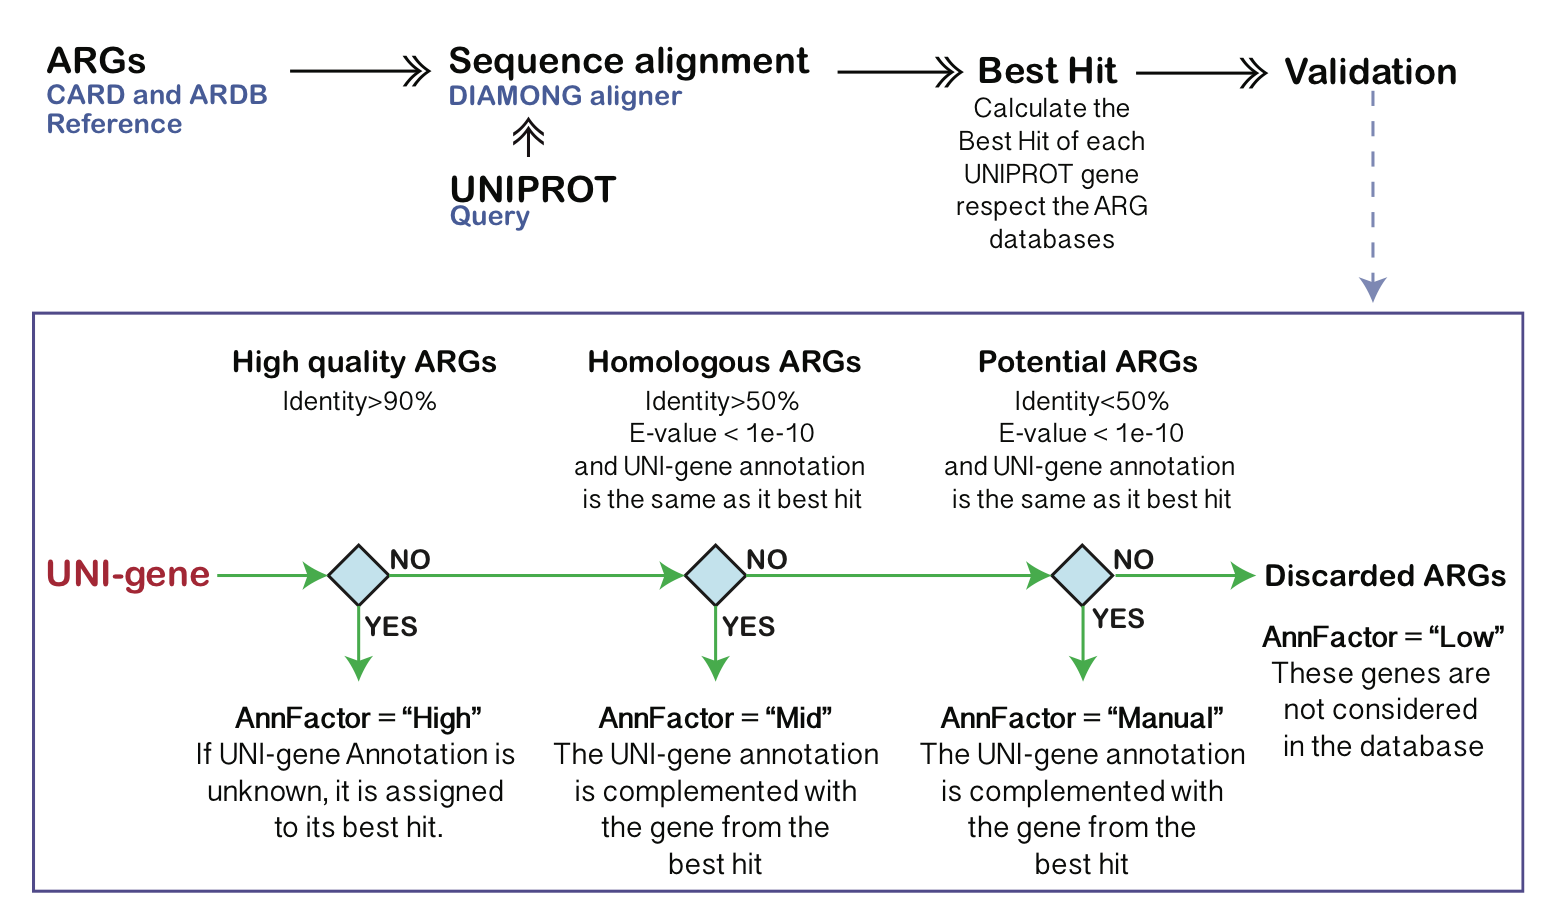 Automatic annotation of highly homologous ARGs